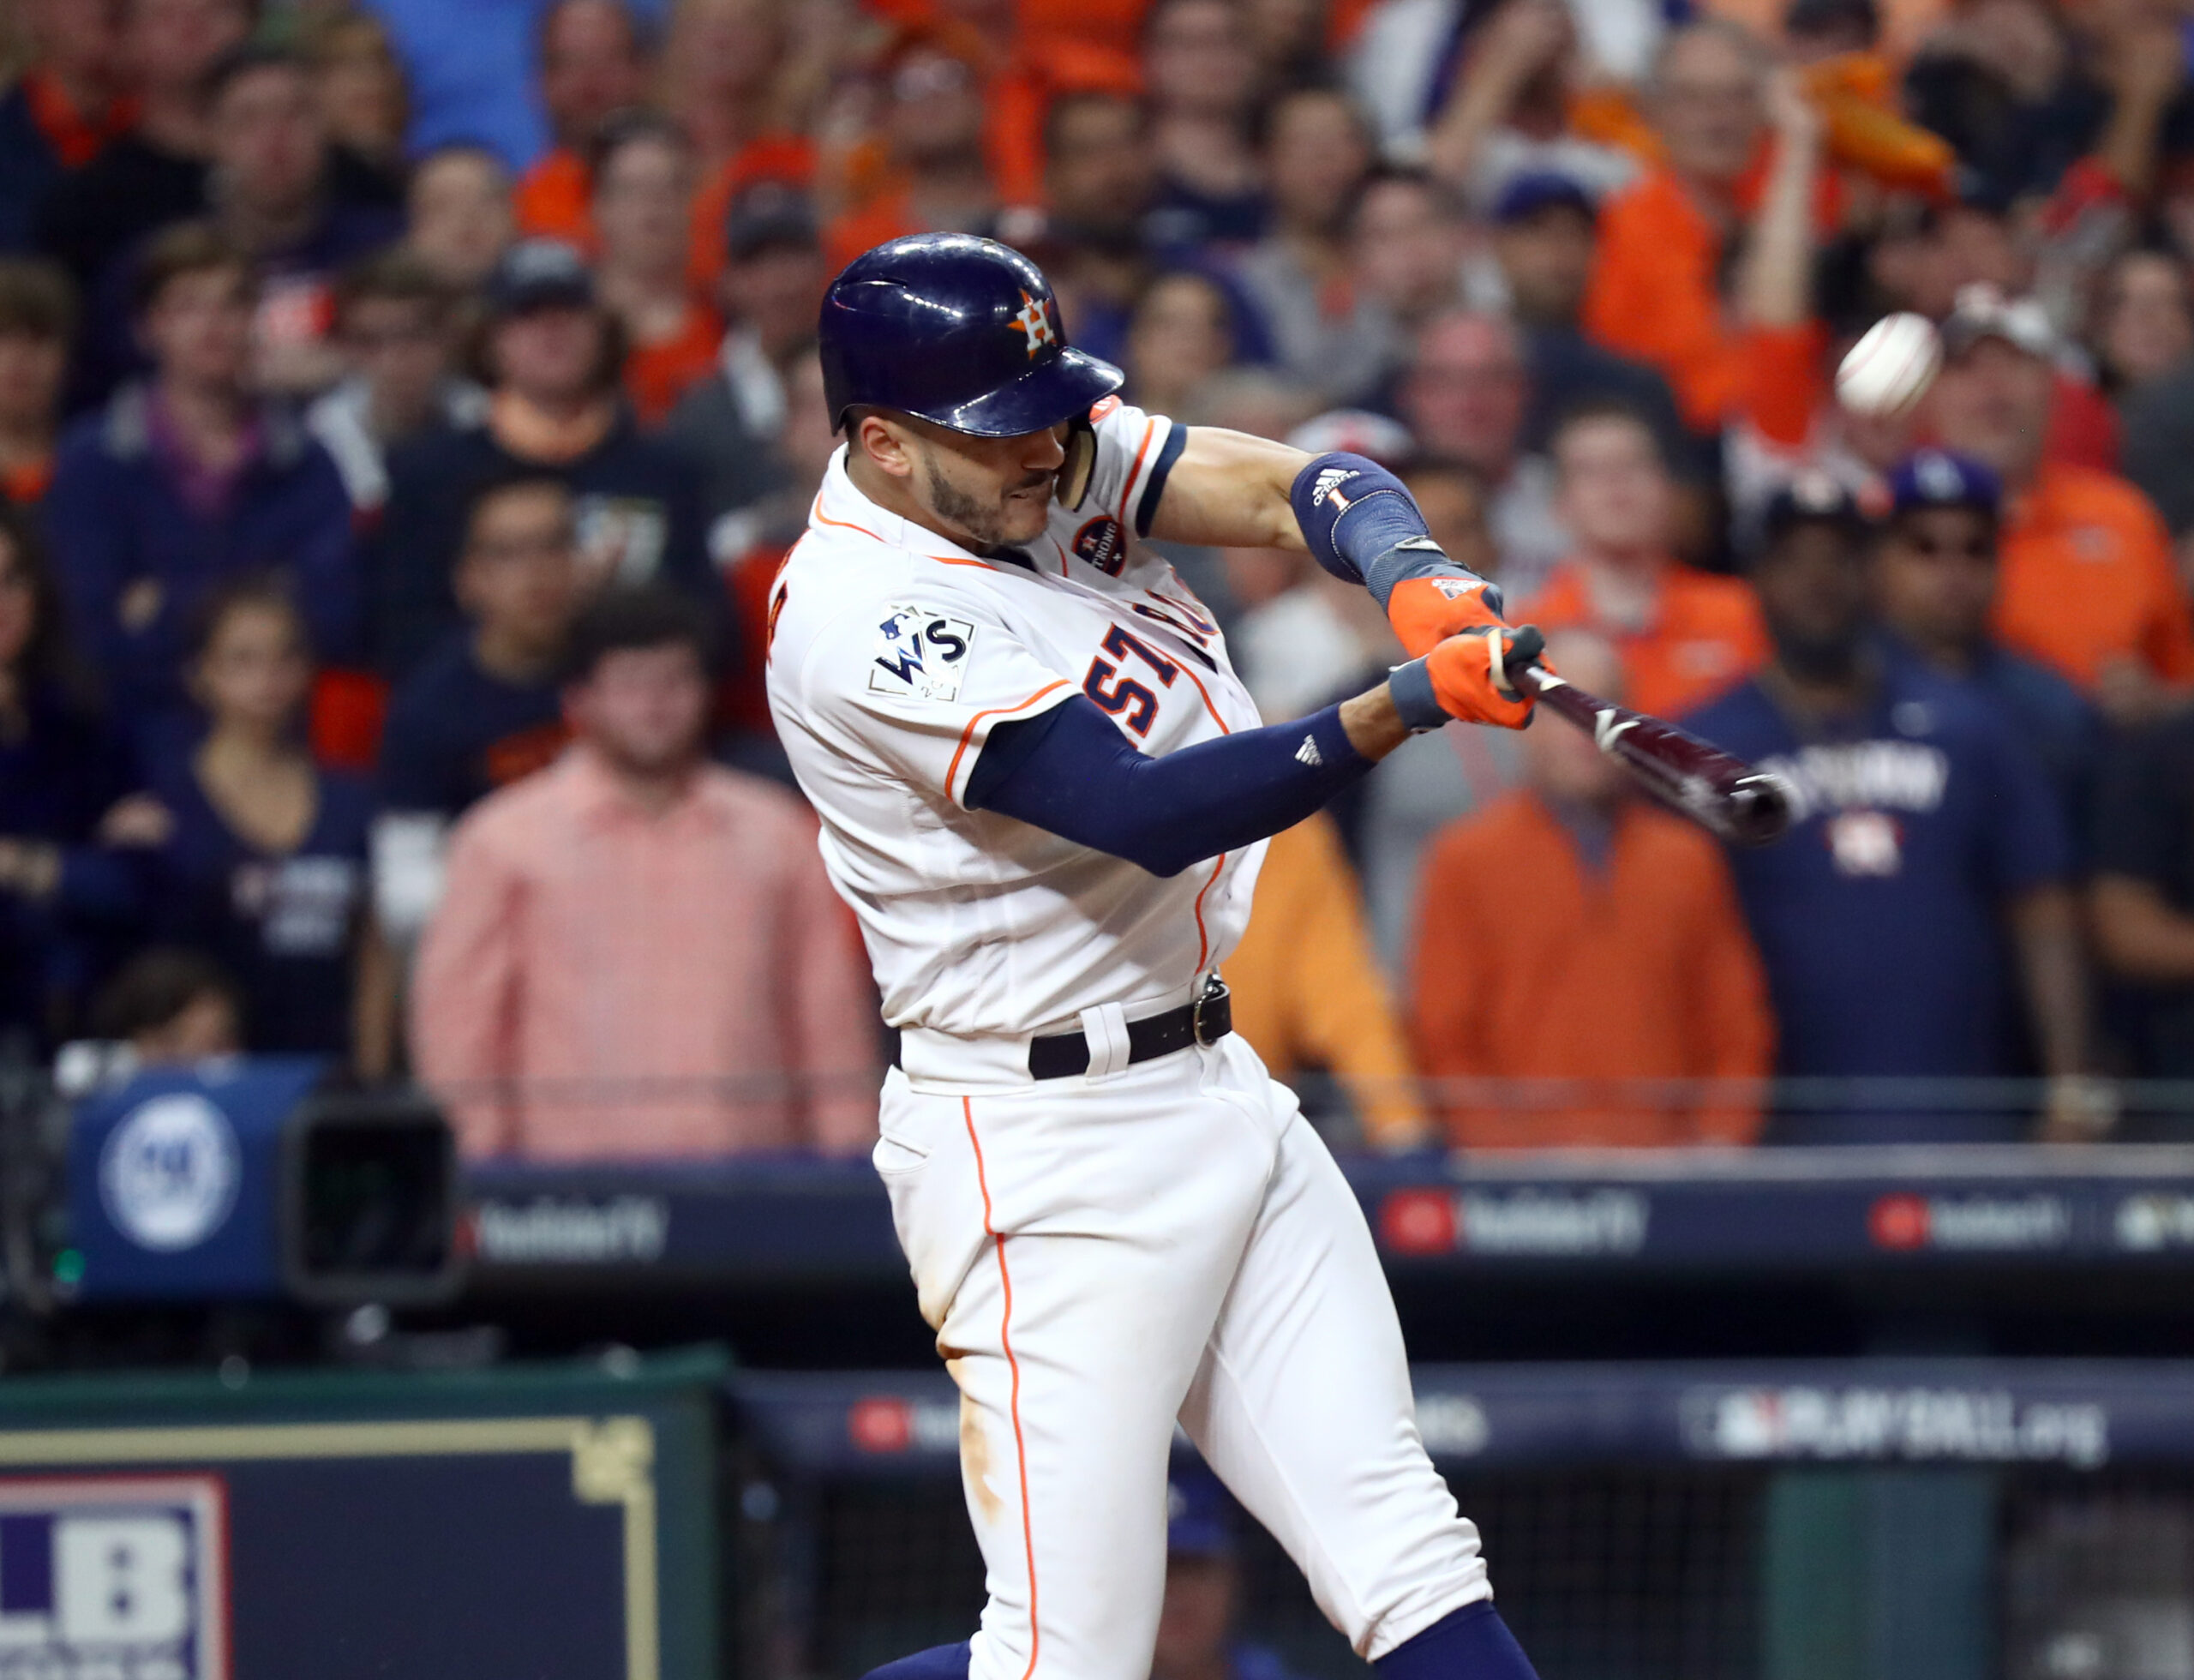 Breaking: Shortstop Carlos Correa and the San Francisco Giants are